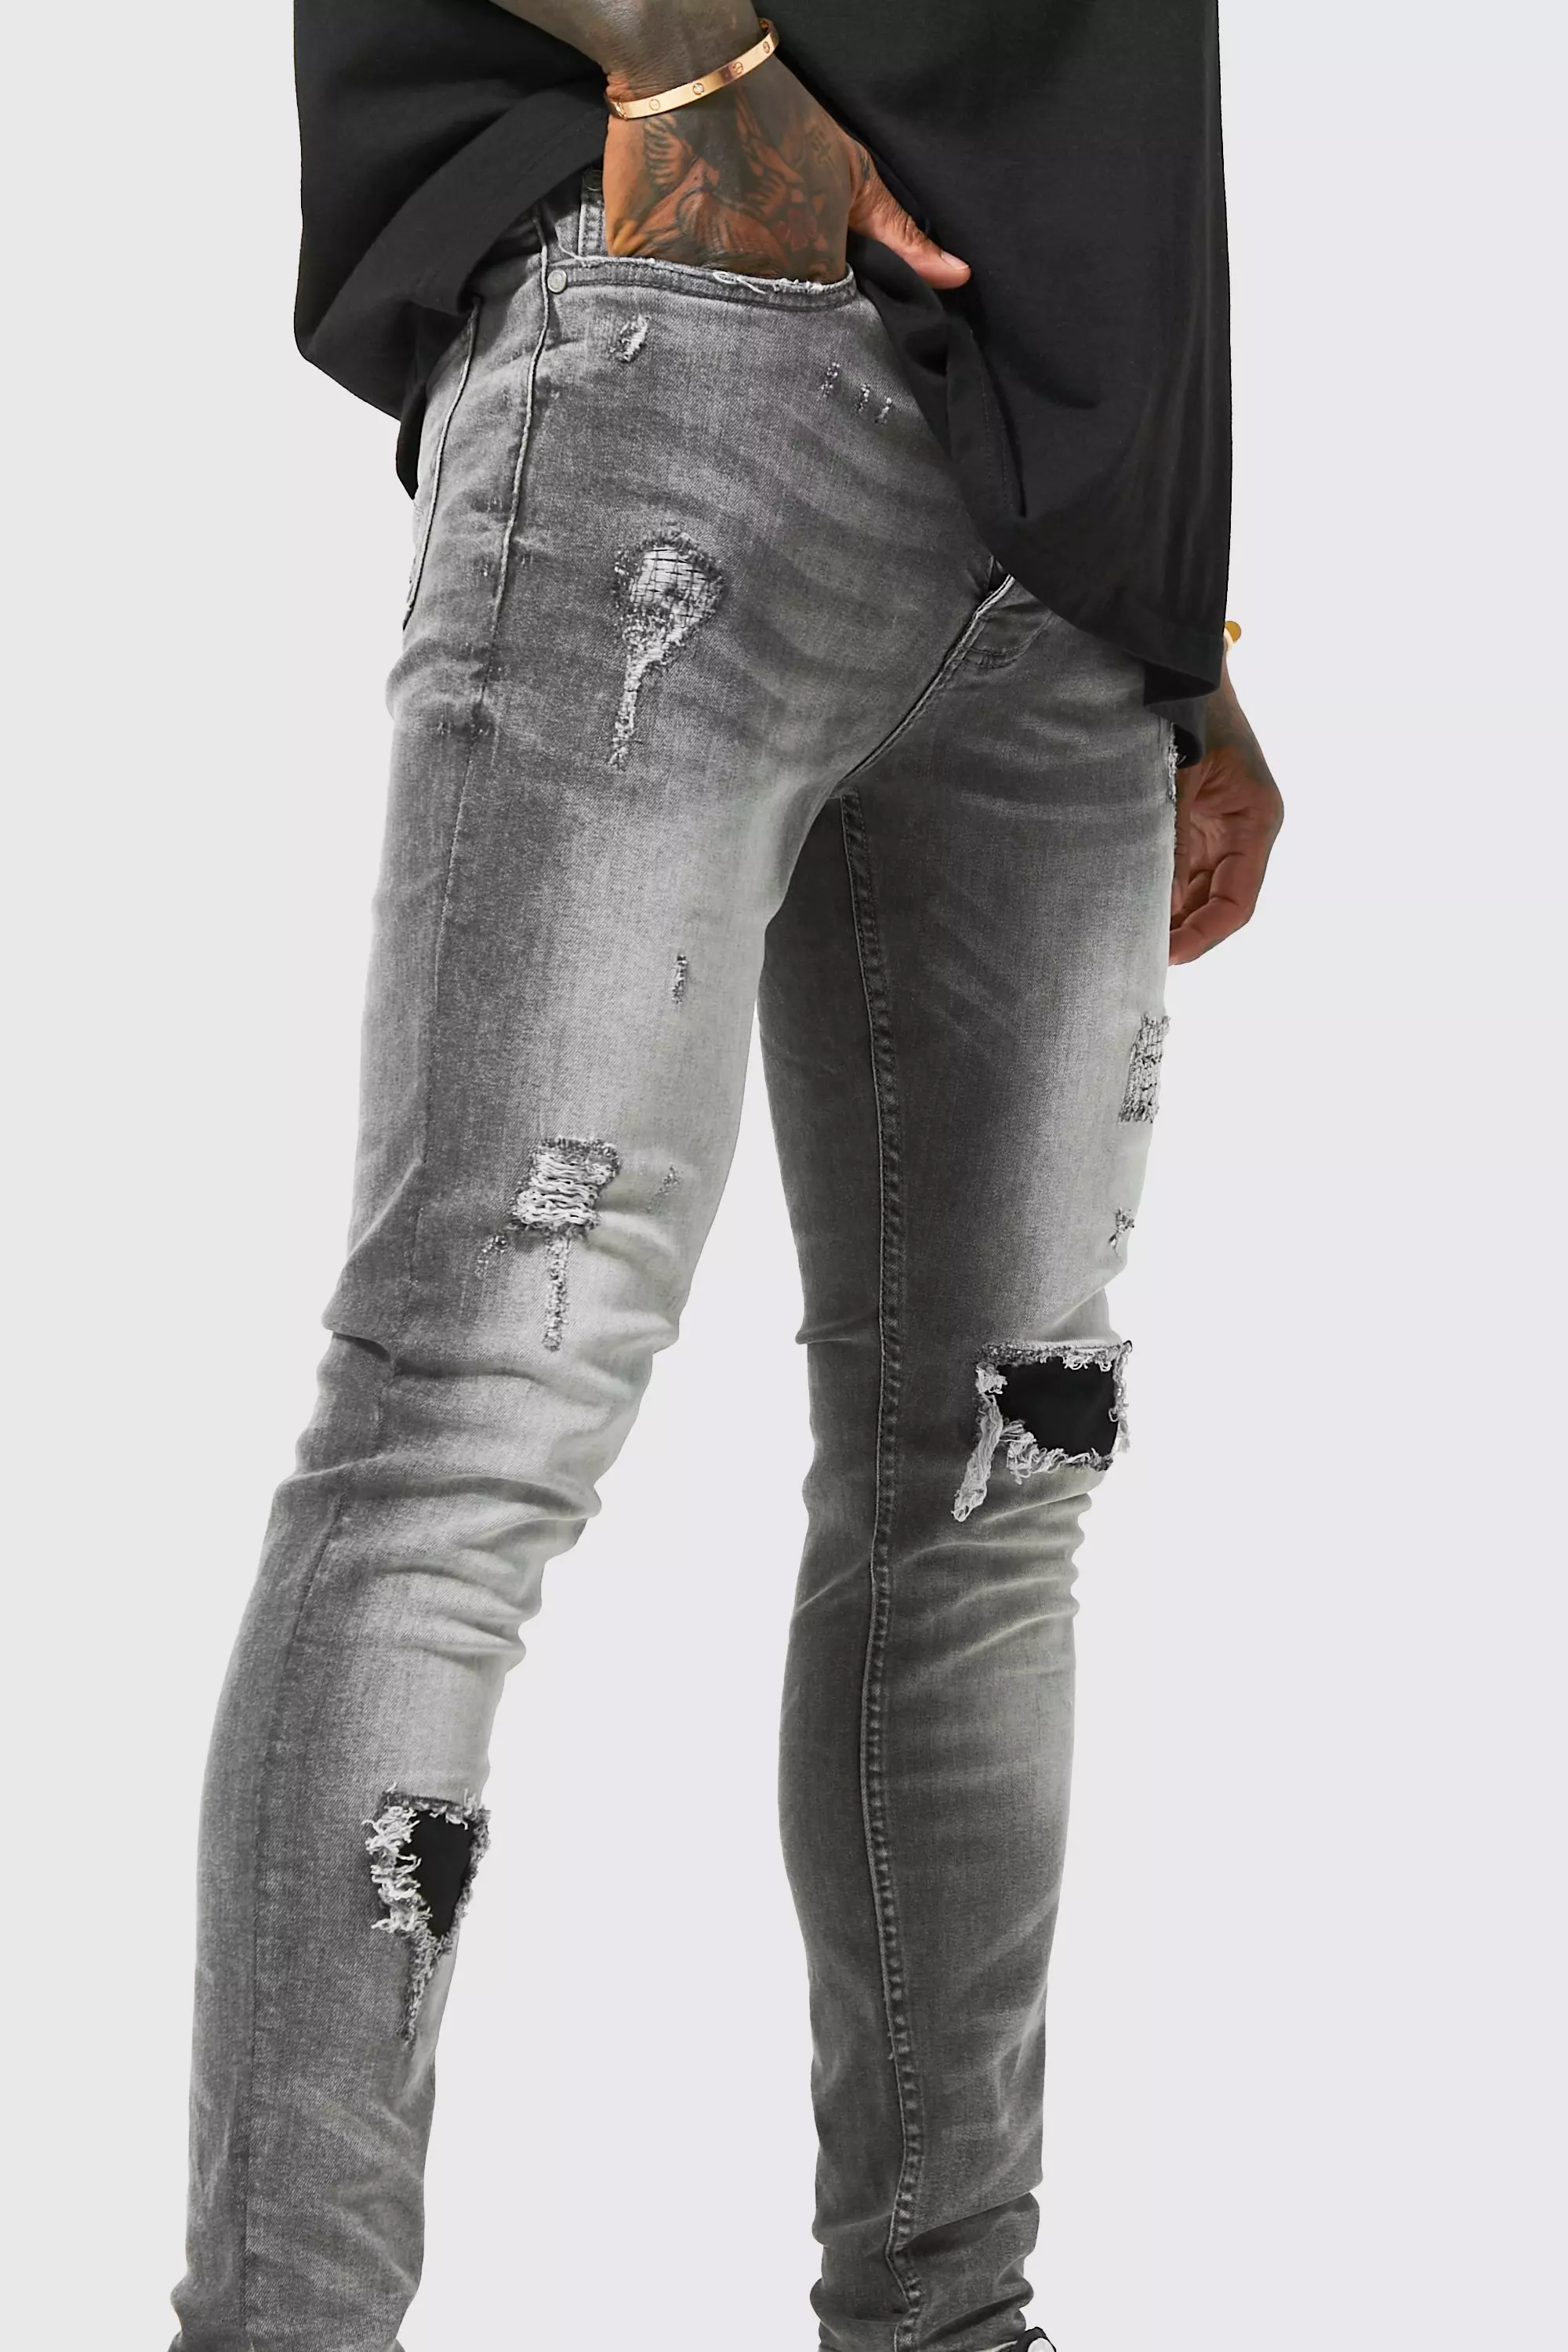 Mens Distressed Leather Skinny Jeans With Ribbed Jean Patches Style 2614  From Sadfk, $81.32